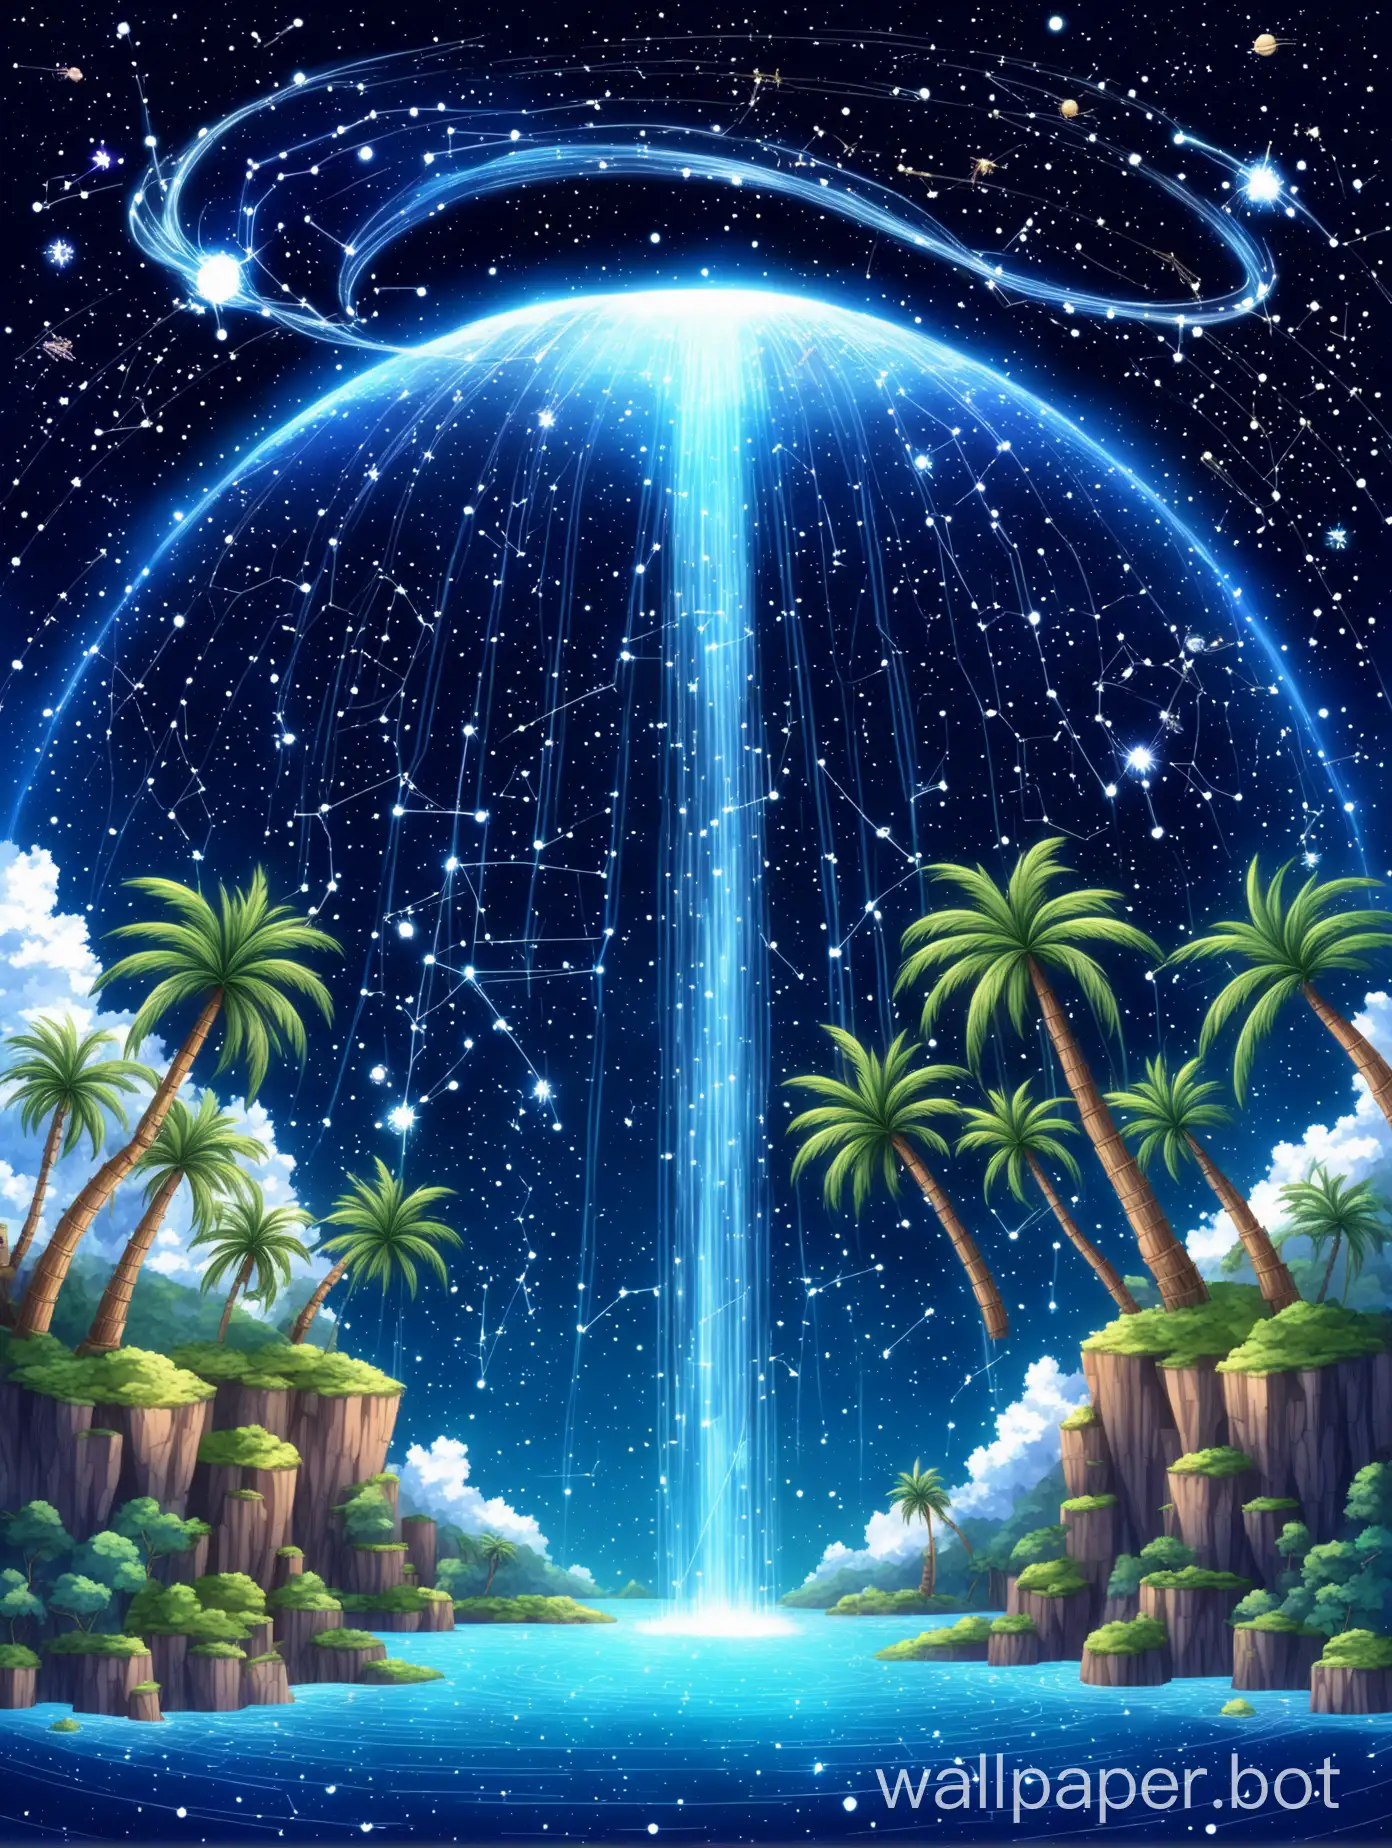 anime style background with floating islands that have palm trees and waterfall water flowing down off the island into outer space where you can see constellations in the background